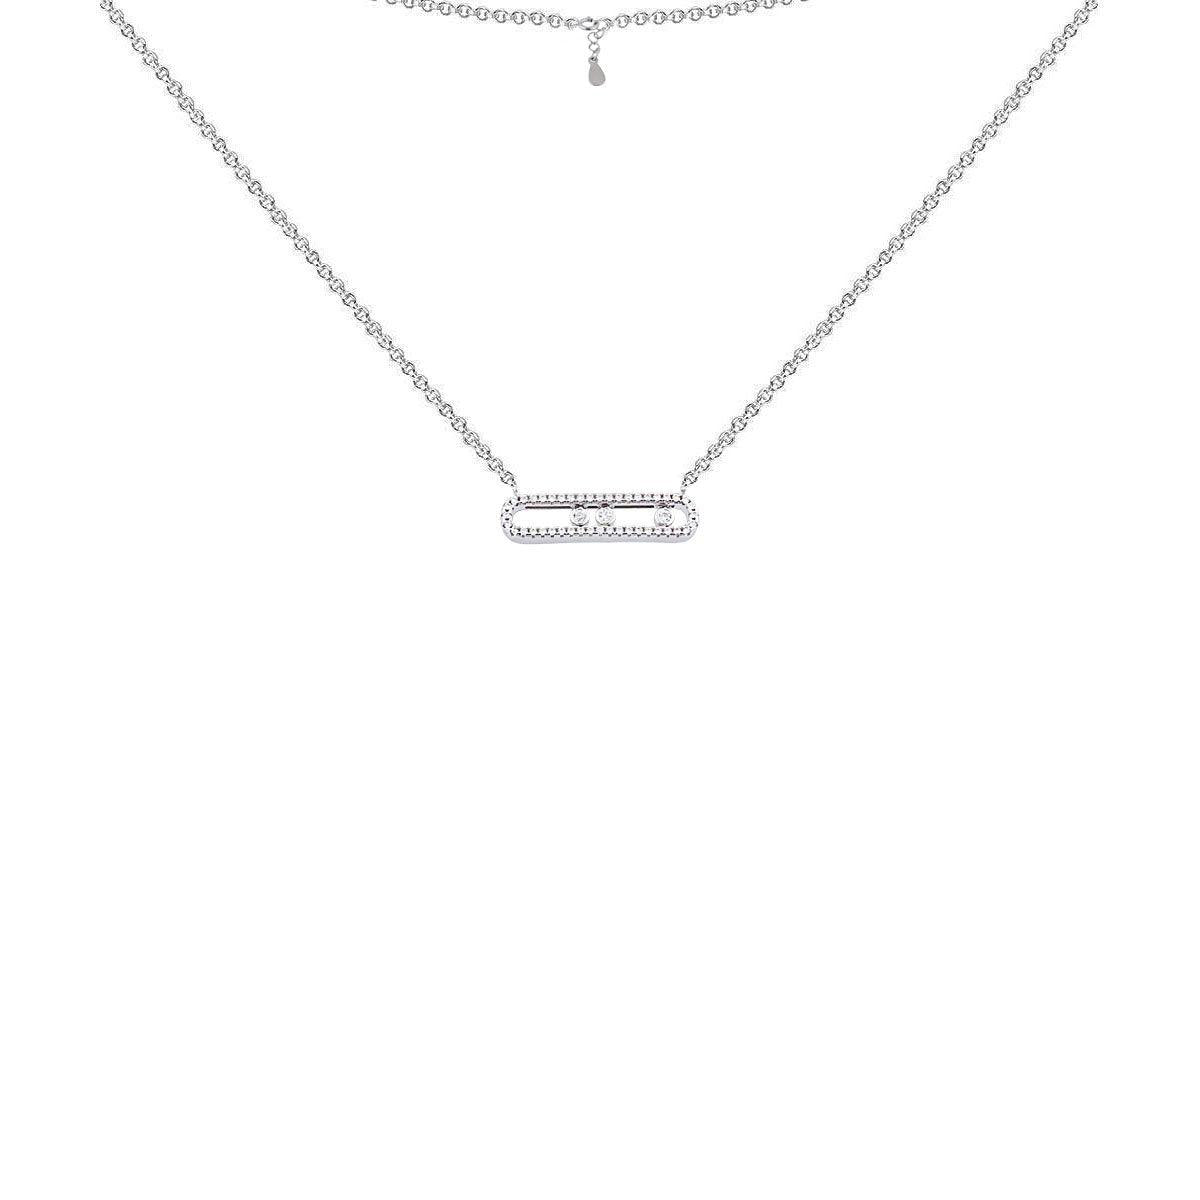 Necklace N1293 - 925 Sterling Silver - Asfour Crystal